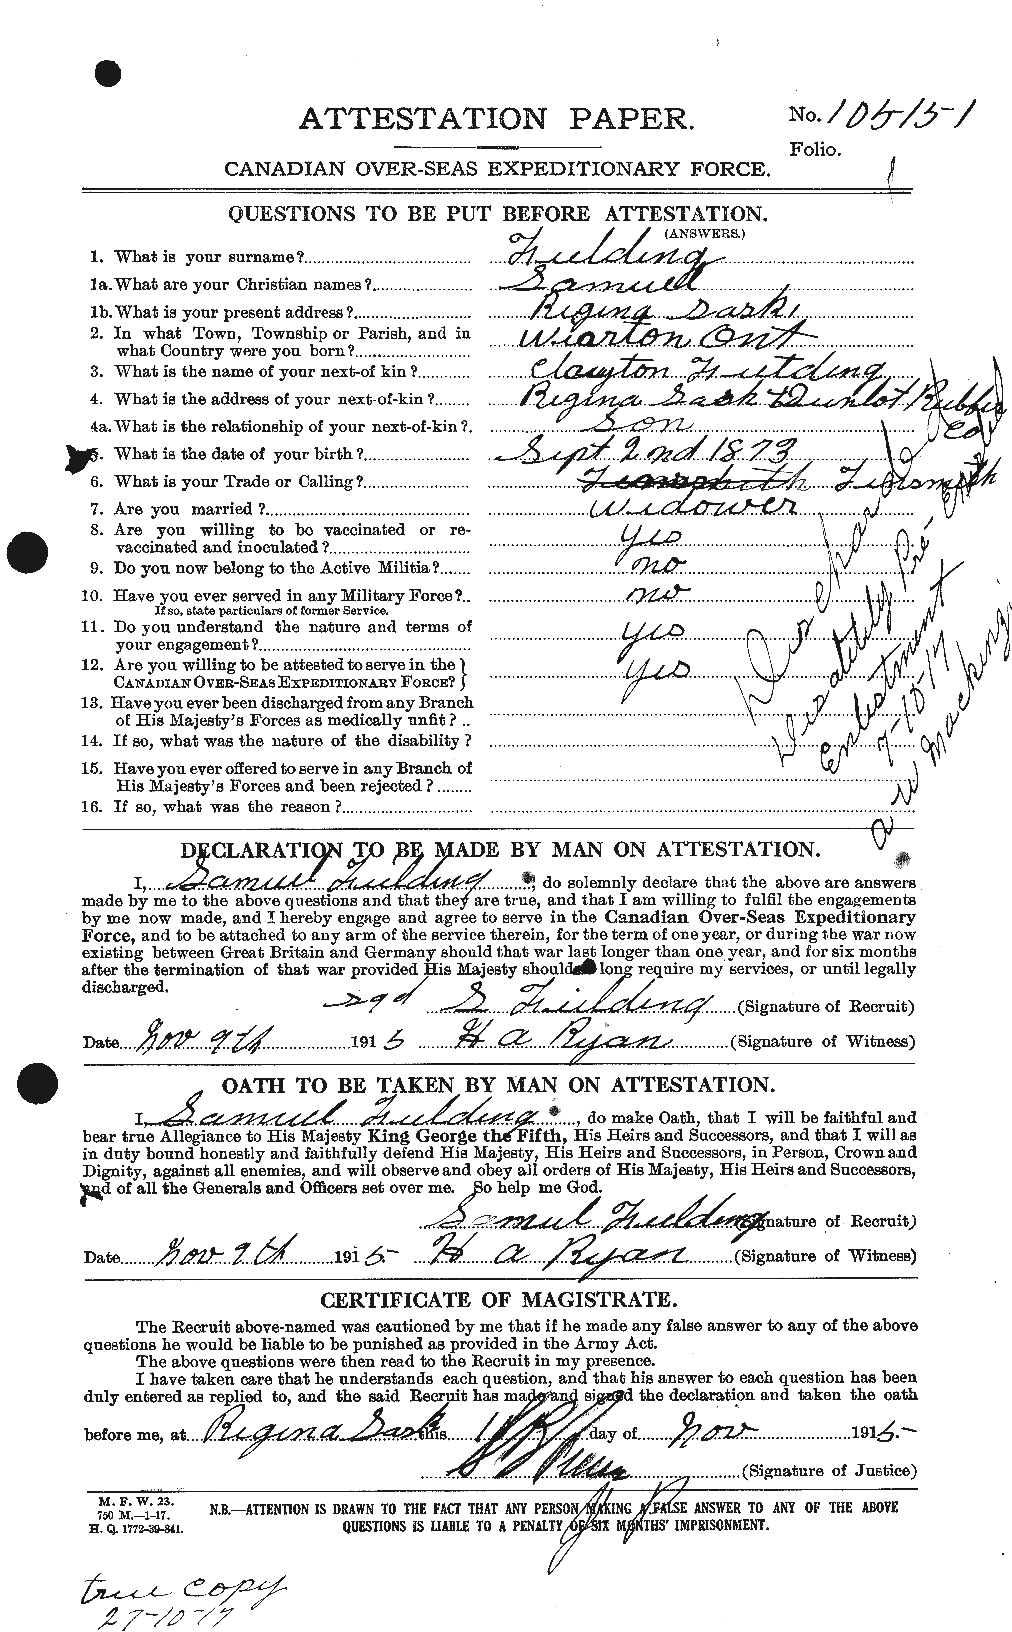 Personnel Records of the First World War - CEF 320951a